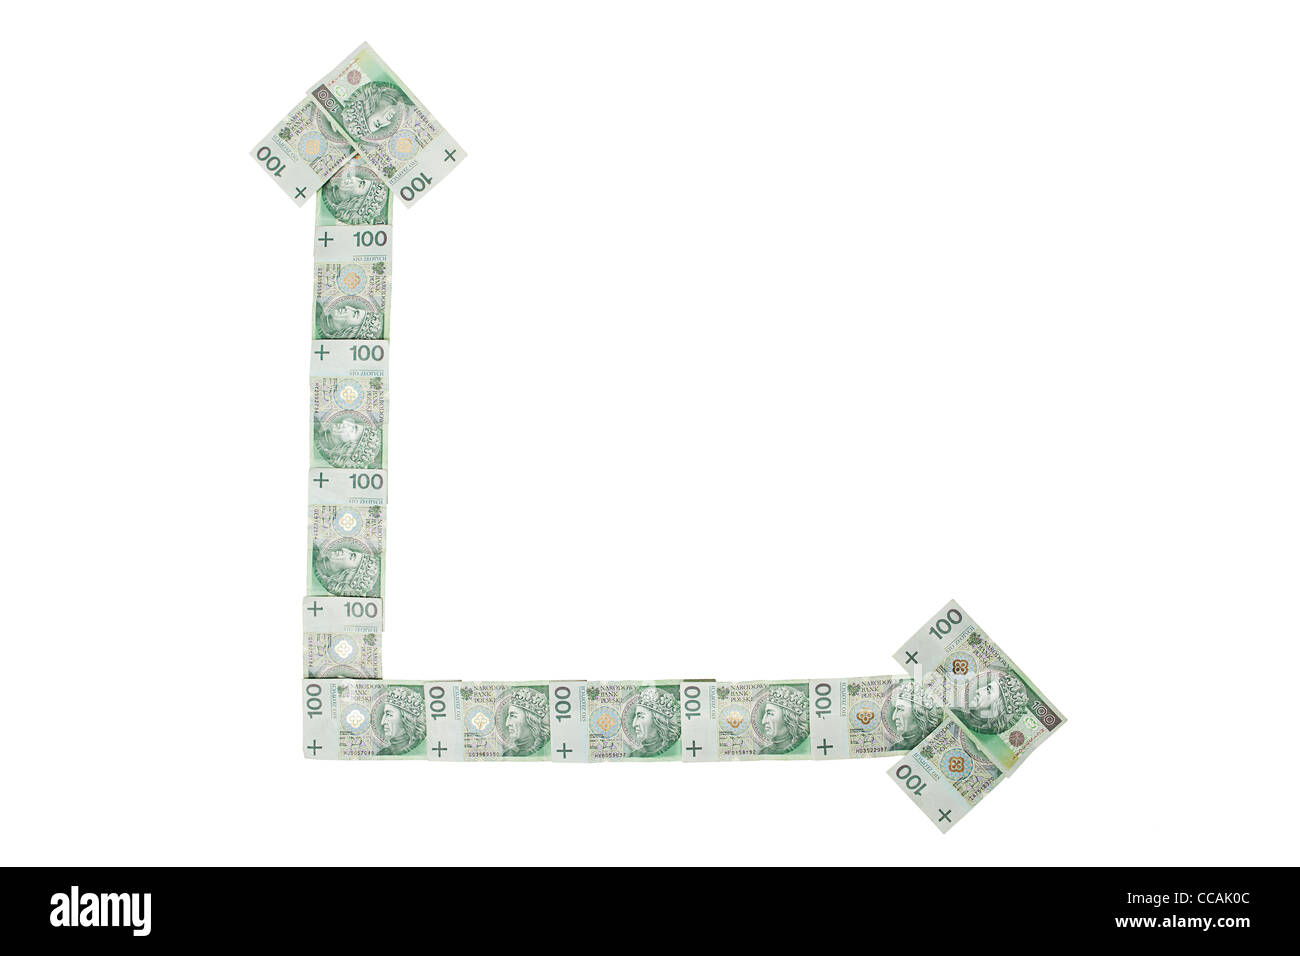 a arrow shapes made of money notes Stock Photo